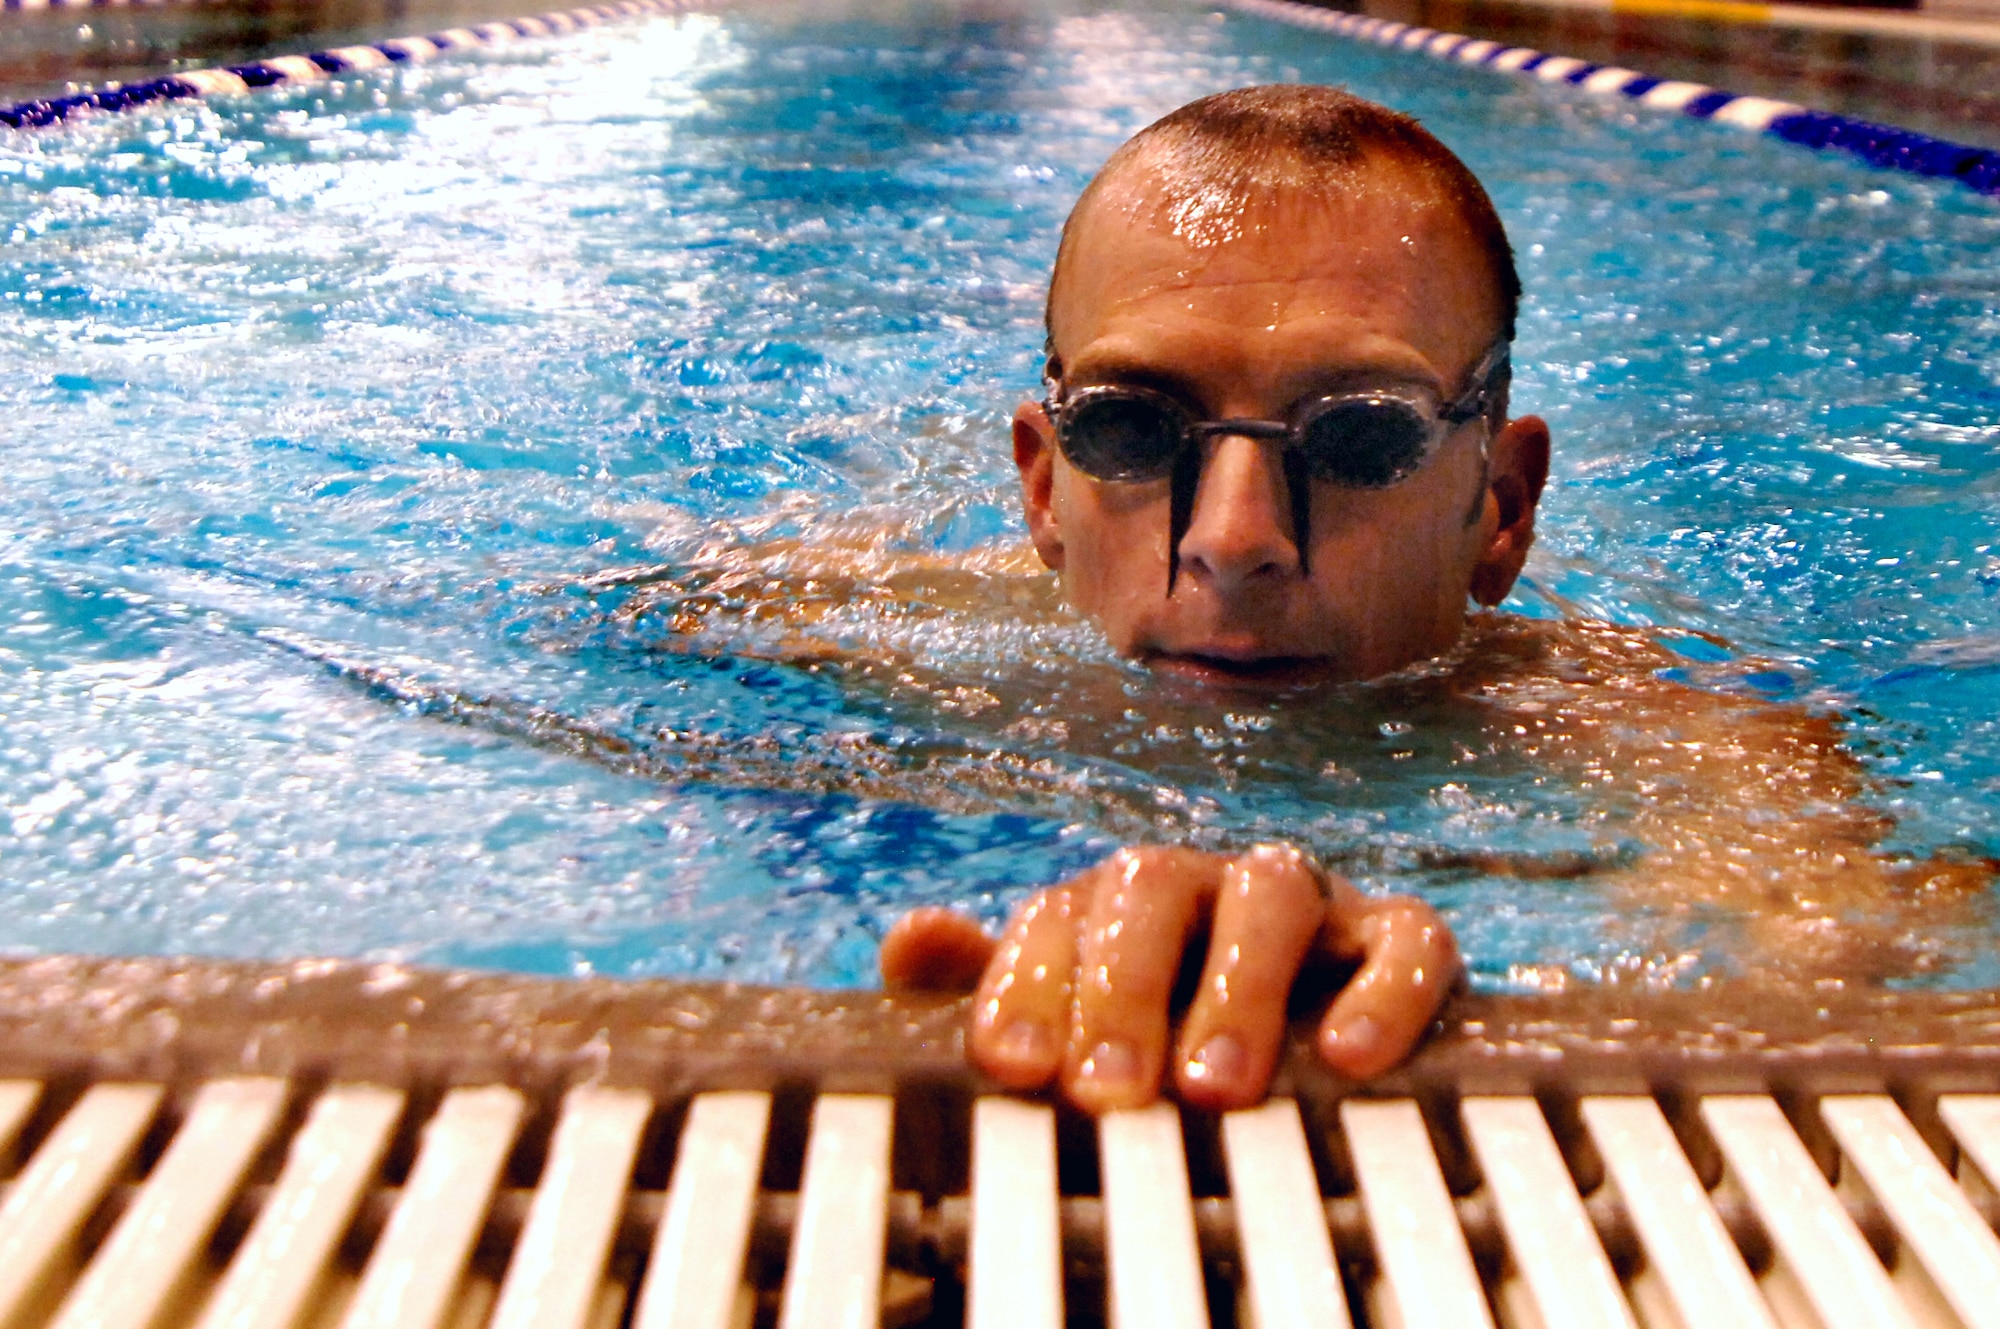 Maj. Scott "Kidd" Poteet, an Air Officer in Command for Cadet Squadron 02, trains for the 2010 Ironman Triathlon at the Cadet Gym pool Oct. 4, 2010 at the cadet gym pool.  Poteet's regimen includes more than three hours of training per day biking, swimming and running.  He typically swims 10,000-15,000 yards per week.  The Ironman Triathlon takes place Oct. 9 in Kona, Hawaii.  (U.S. Air Force photo/Staff Sgt. Raymond Hoy)